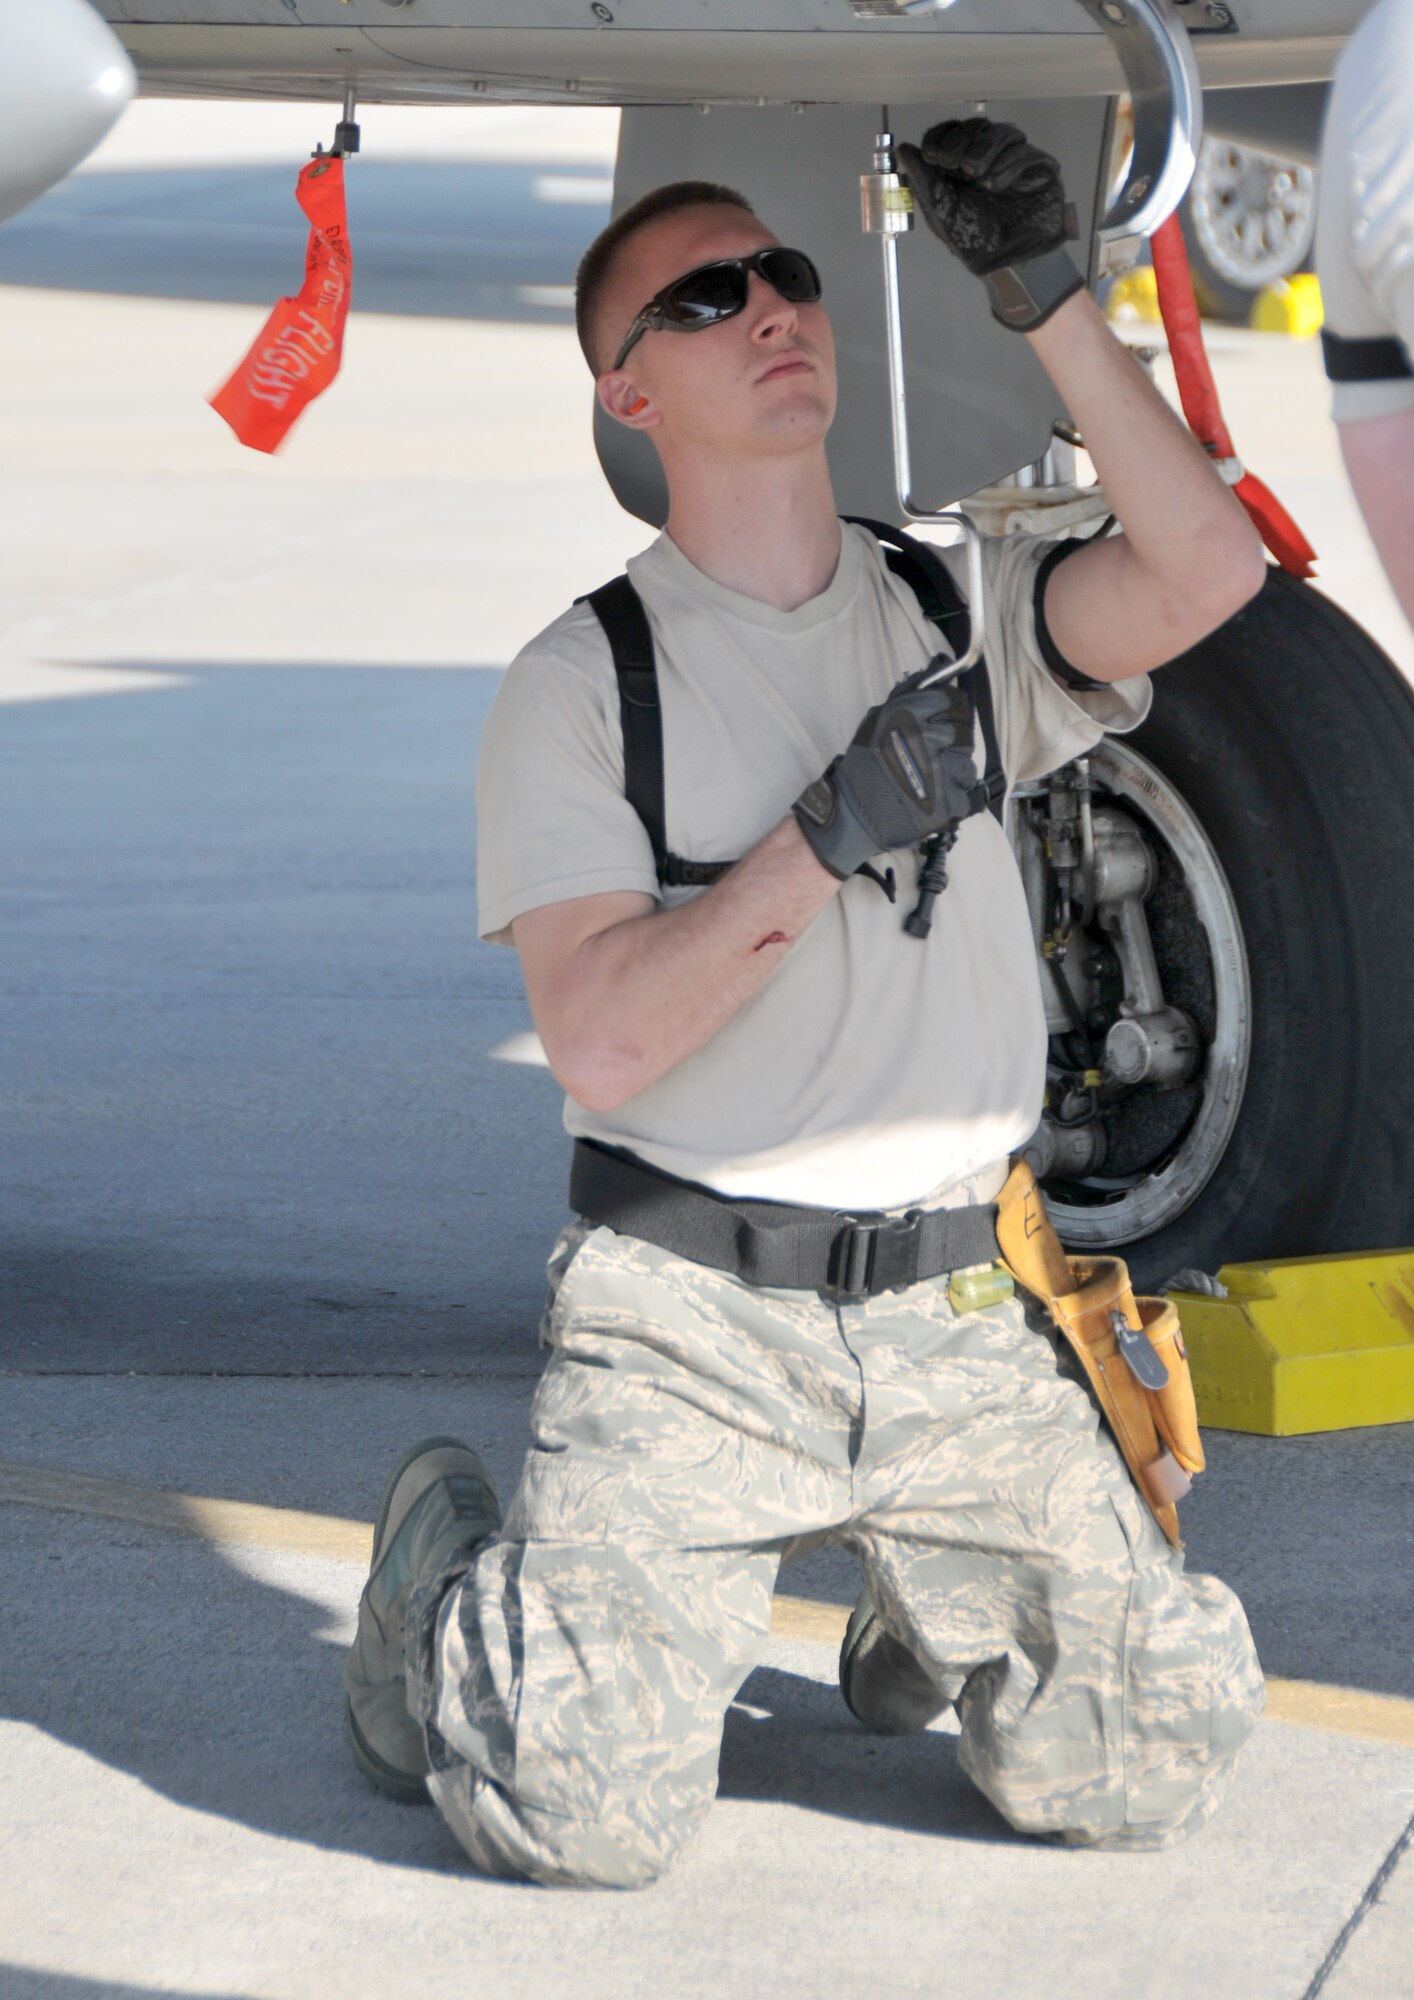 Staff Sergeant Ryan Quigley a weapons loader with the 104th Fighter Wing, Massachusetts Air National Guard prepares to load flares into an F-15 Eagle while deployed to Tyndall AFB Florida, in support of the Weapons System Evaluation Program (WSEP) on April 11, 2011. The two week training and evaluation program is important for ground crews to test their maintenance systems and processes while loading live munitions on F-15 Eagles, as well as critical live training for the F-15 pilots to employ air-to-air missiles against real world targets.